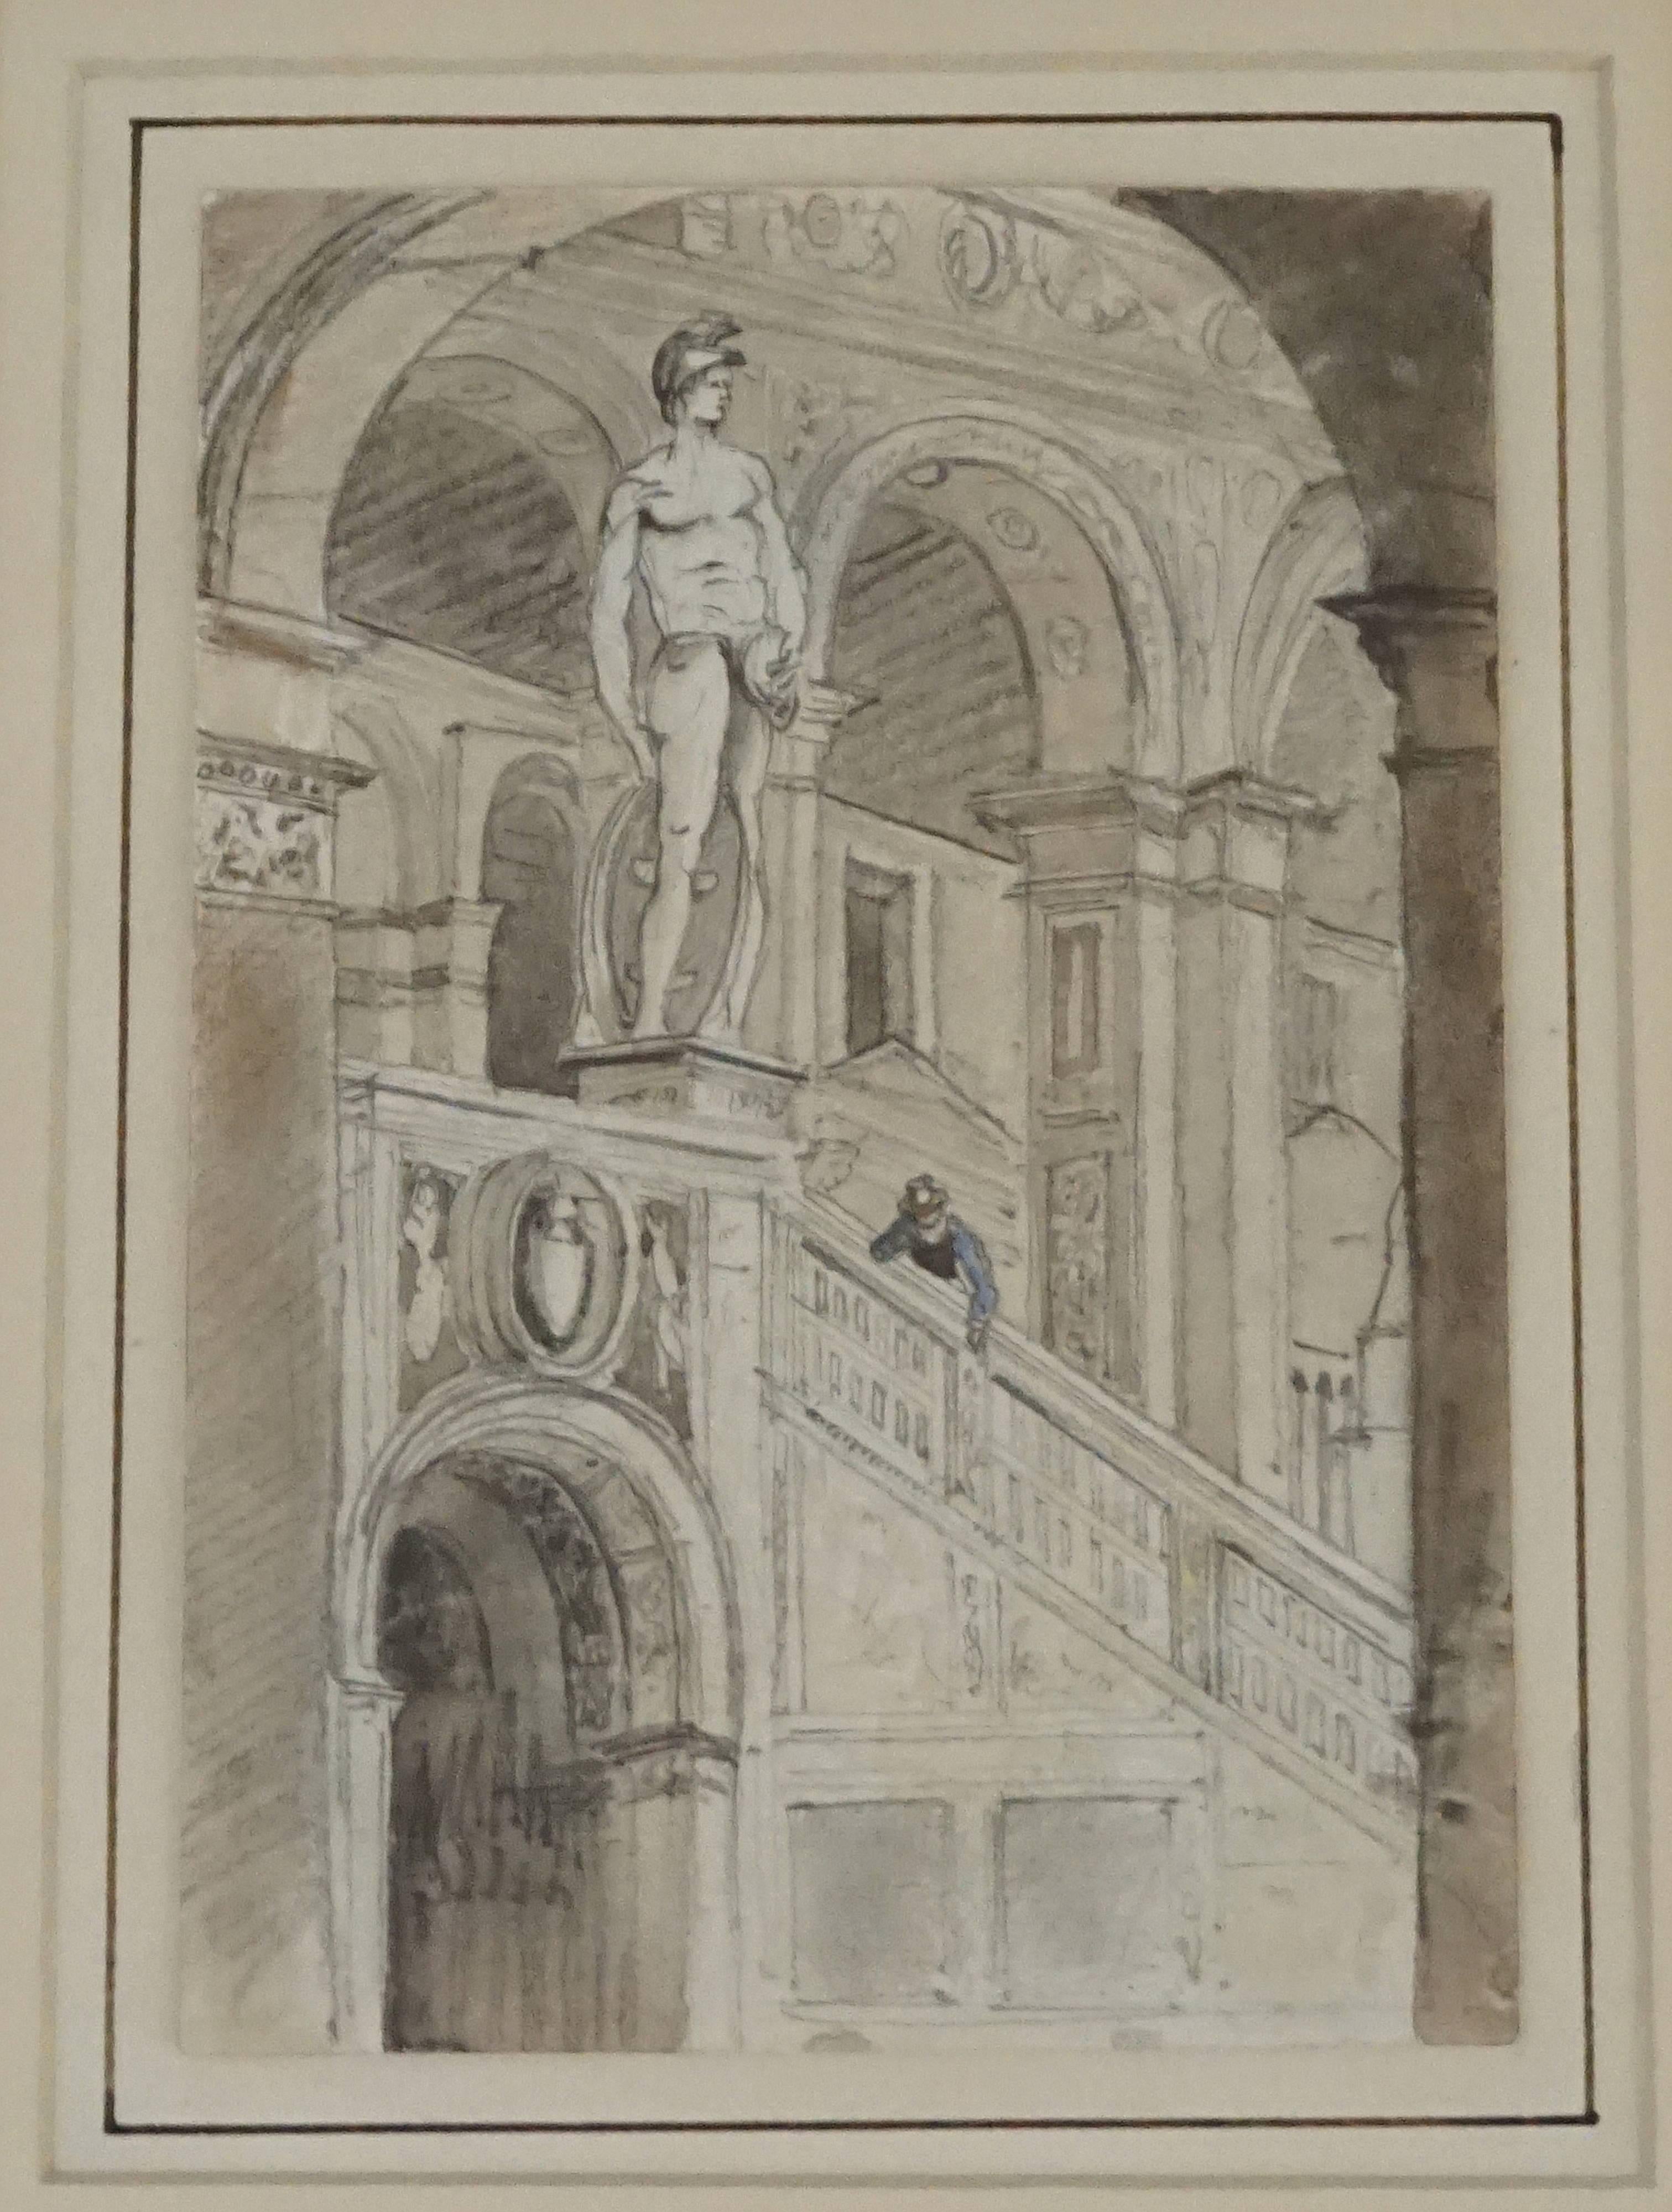 Grand Tour charcoal and watercolor drawing executed by an English tourist in Italy, circa 1800, depicting a gentleman peering over a staircase balustrade in a Baroque interior surrounded by arches and statuary; conservation double French matted in a